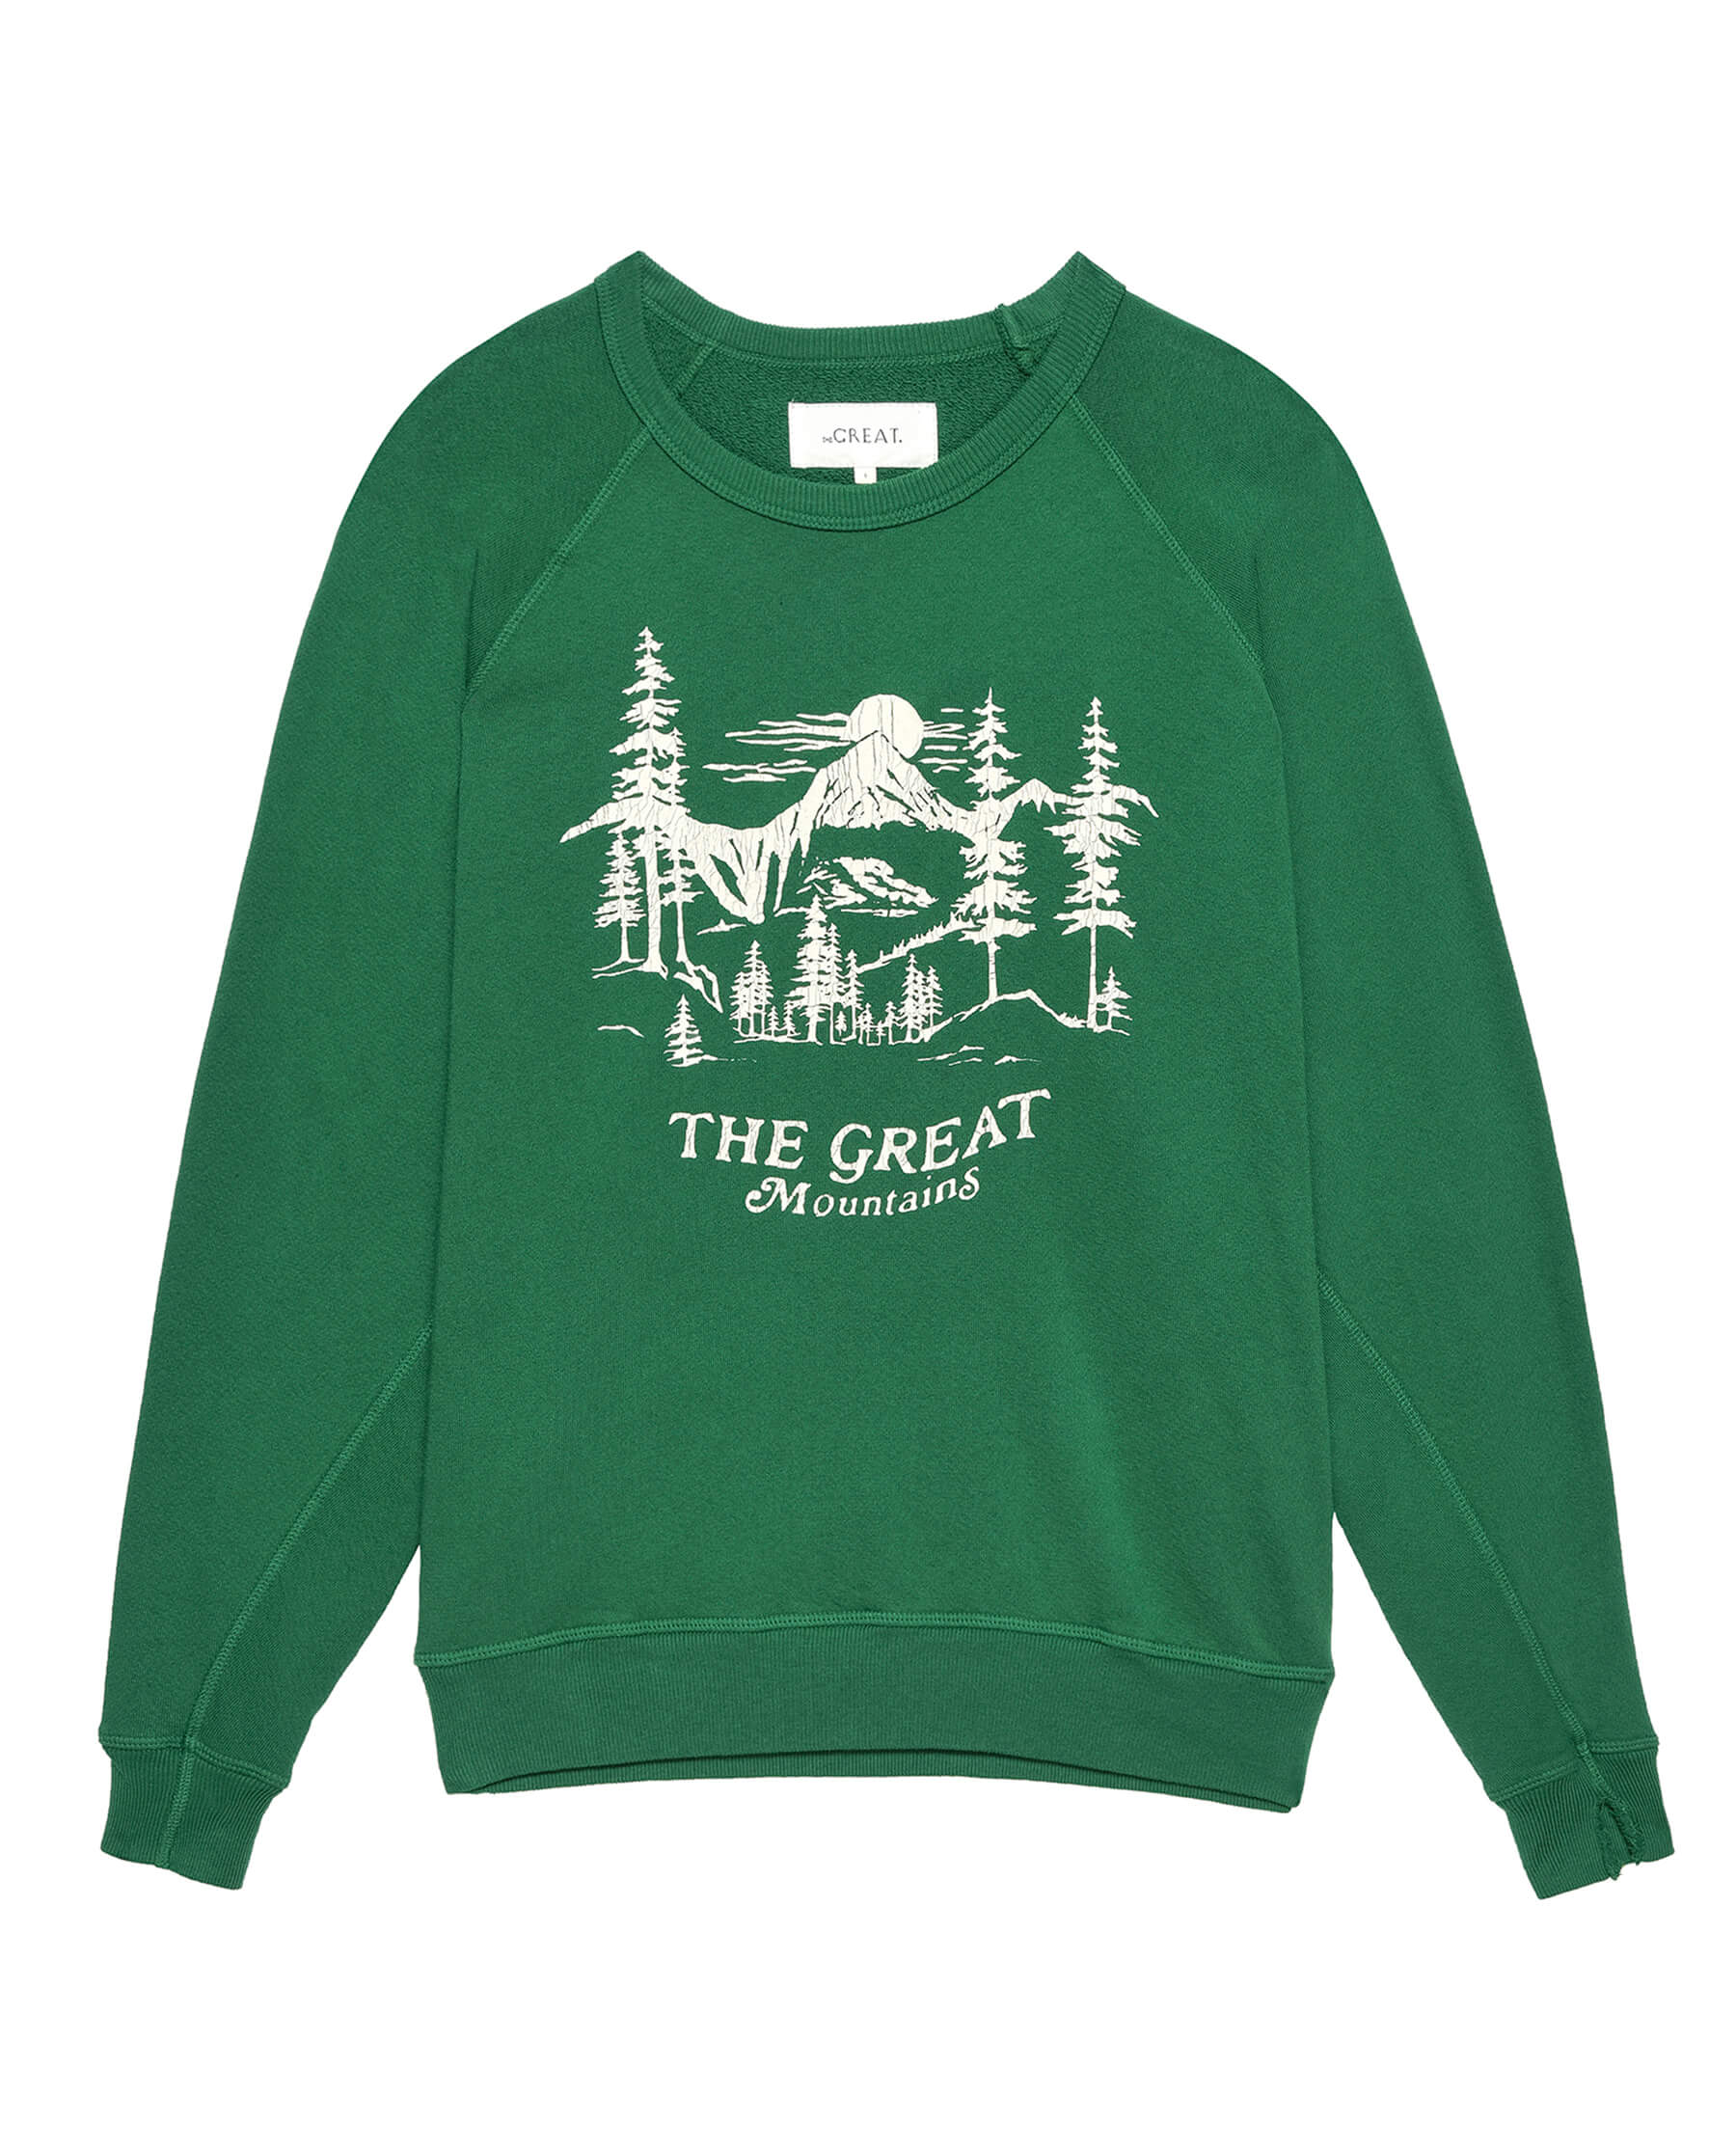 The College Sweatshirt. Graphic -- Holly Leaf with Snowdrift Graphic